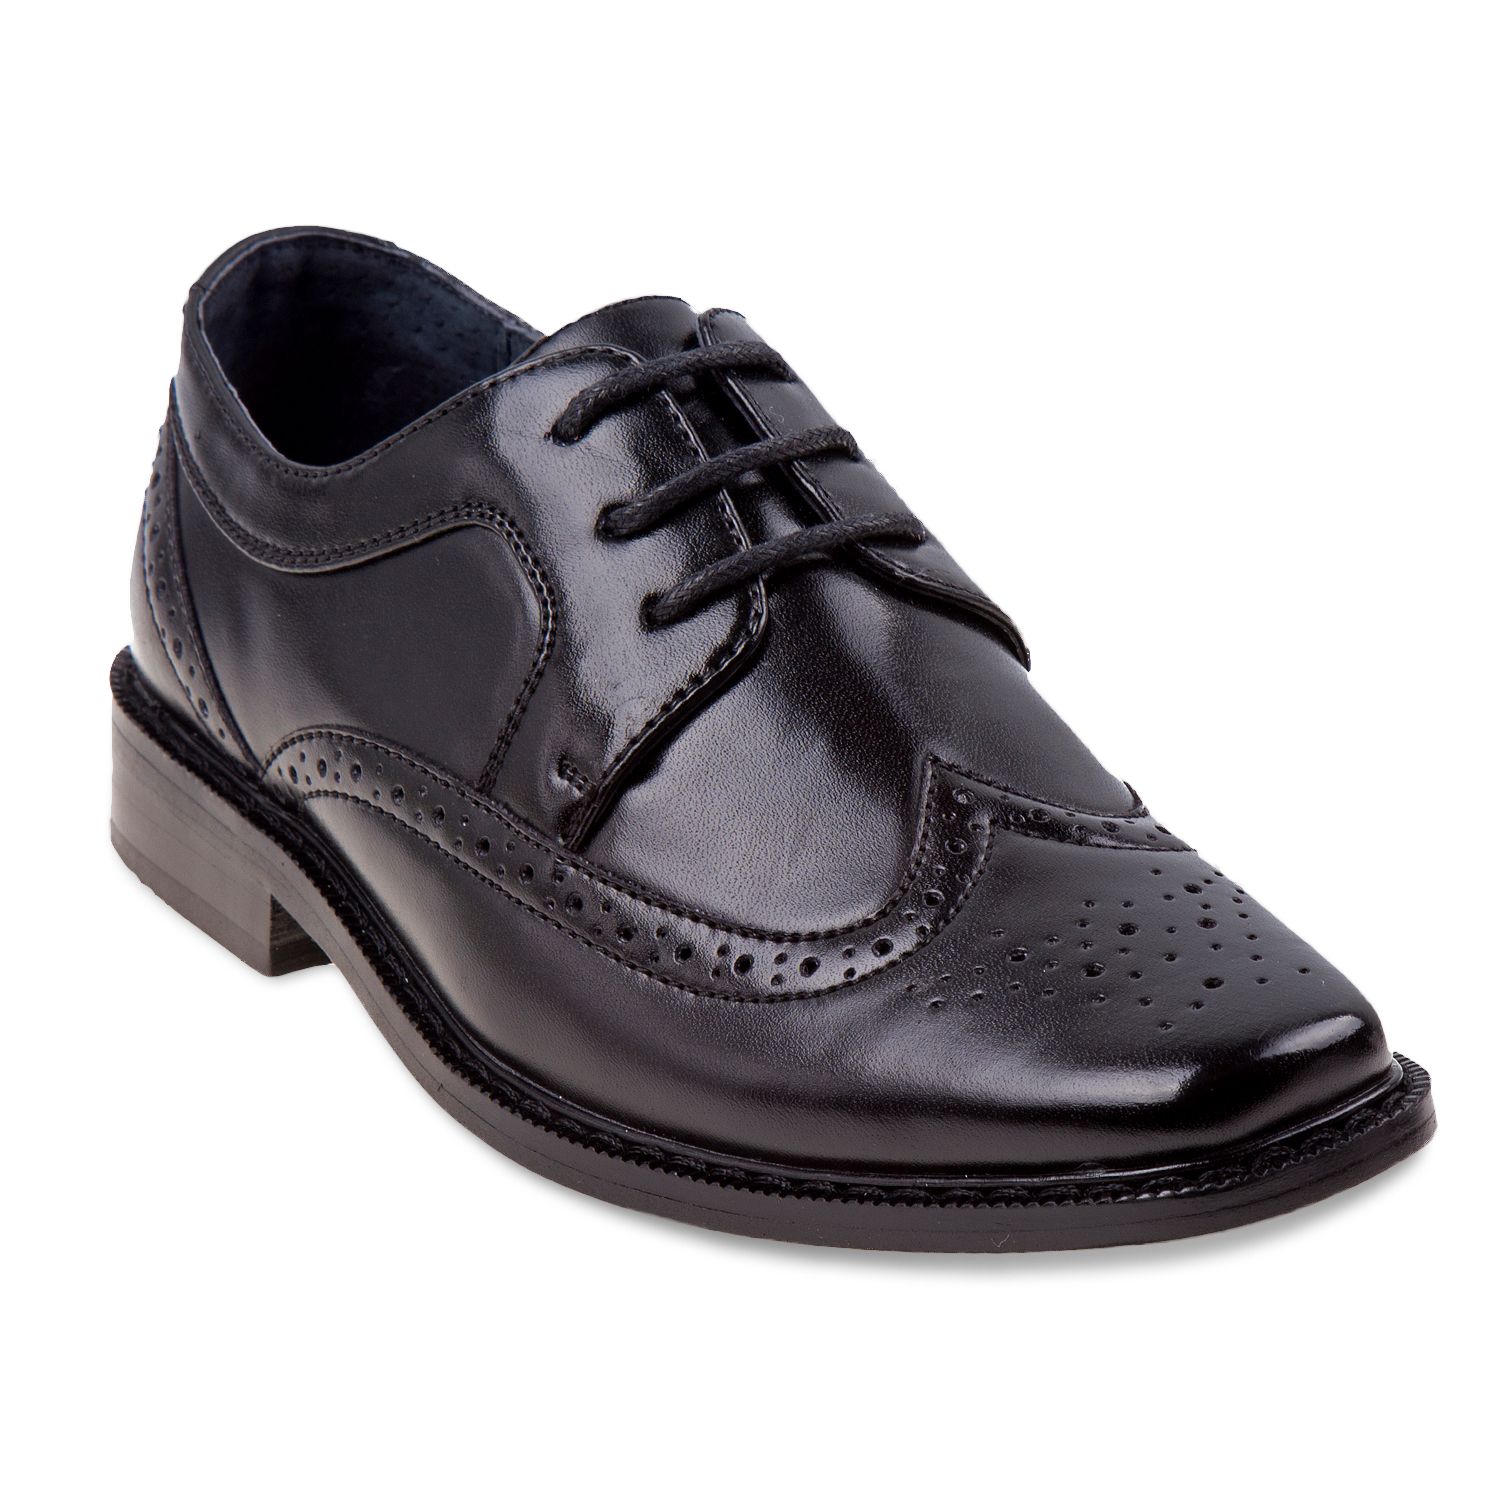 boys youth dress shoes